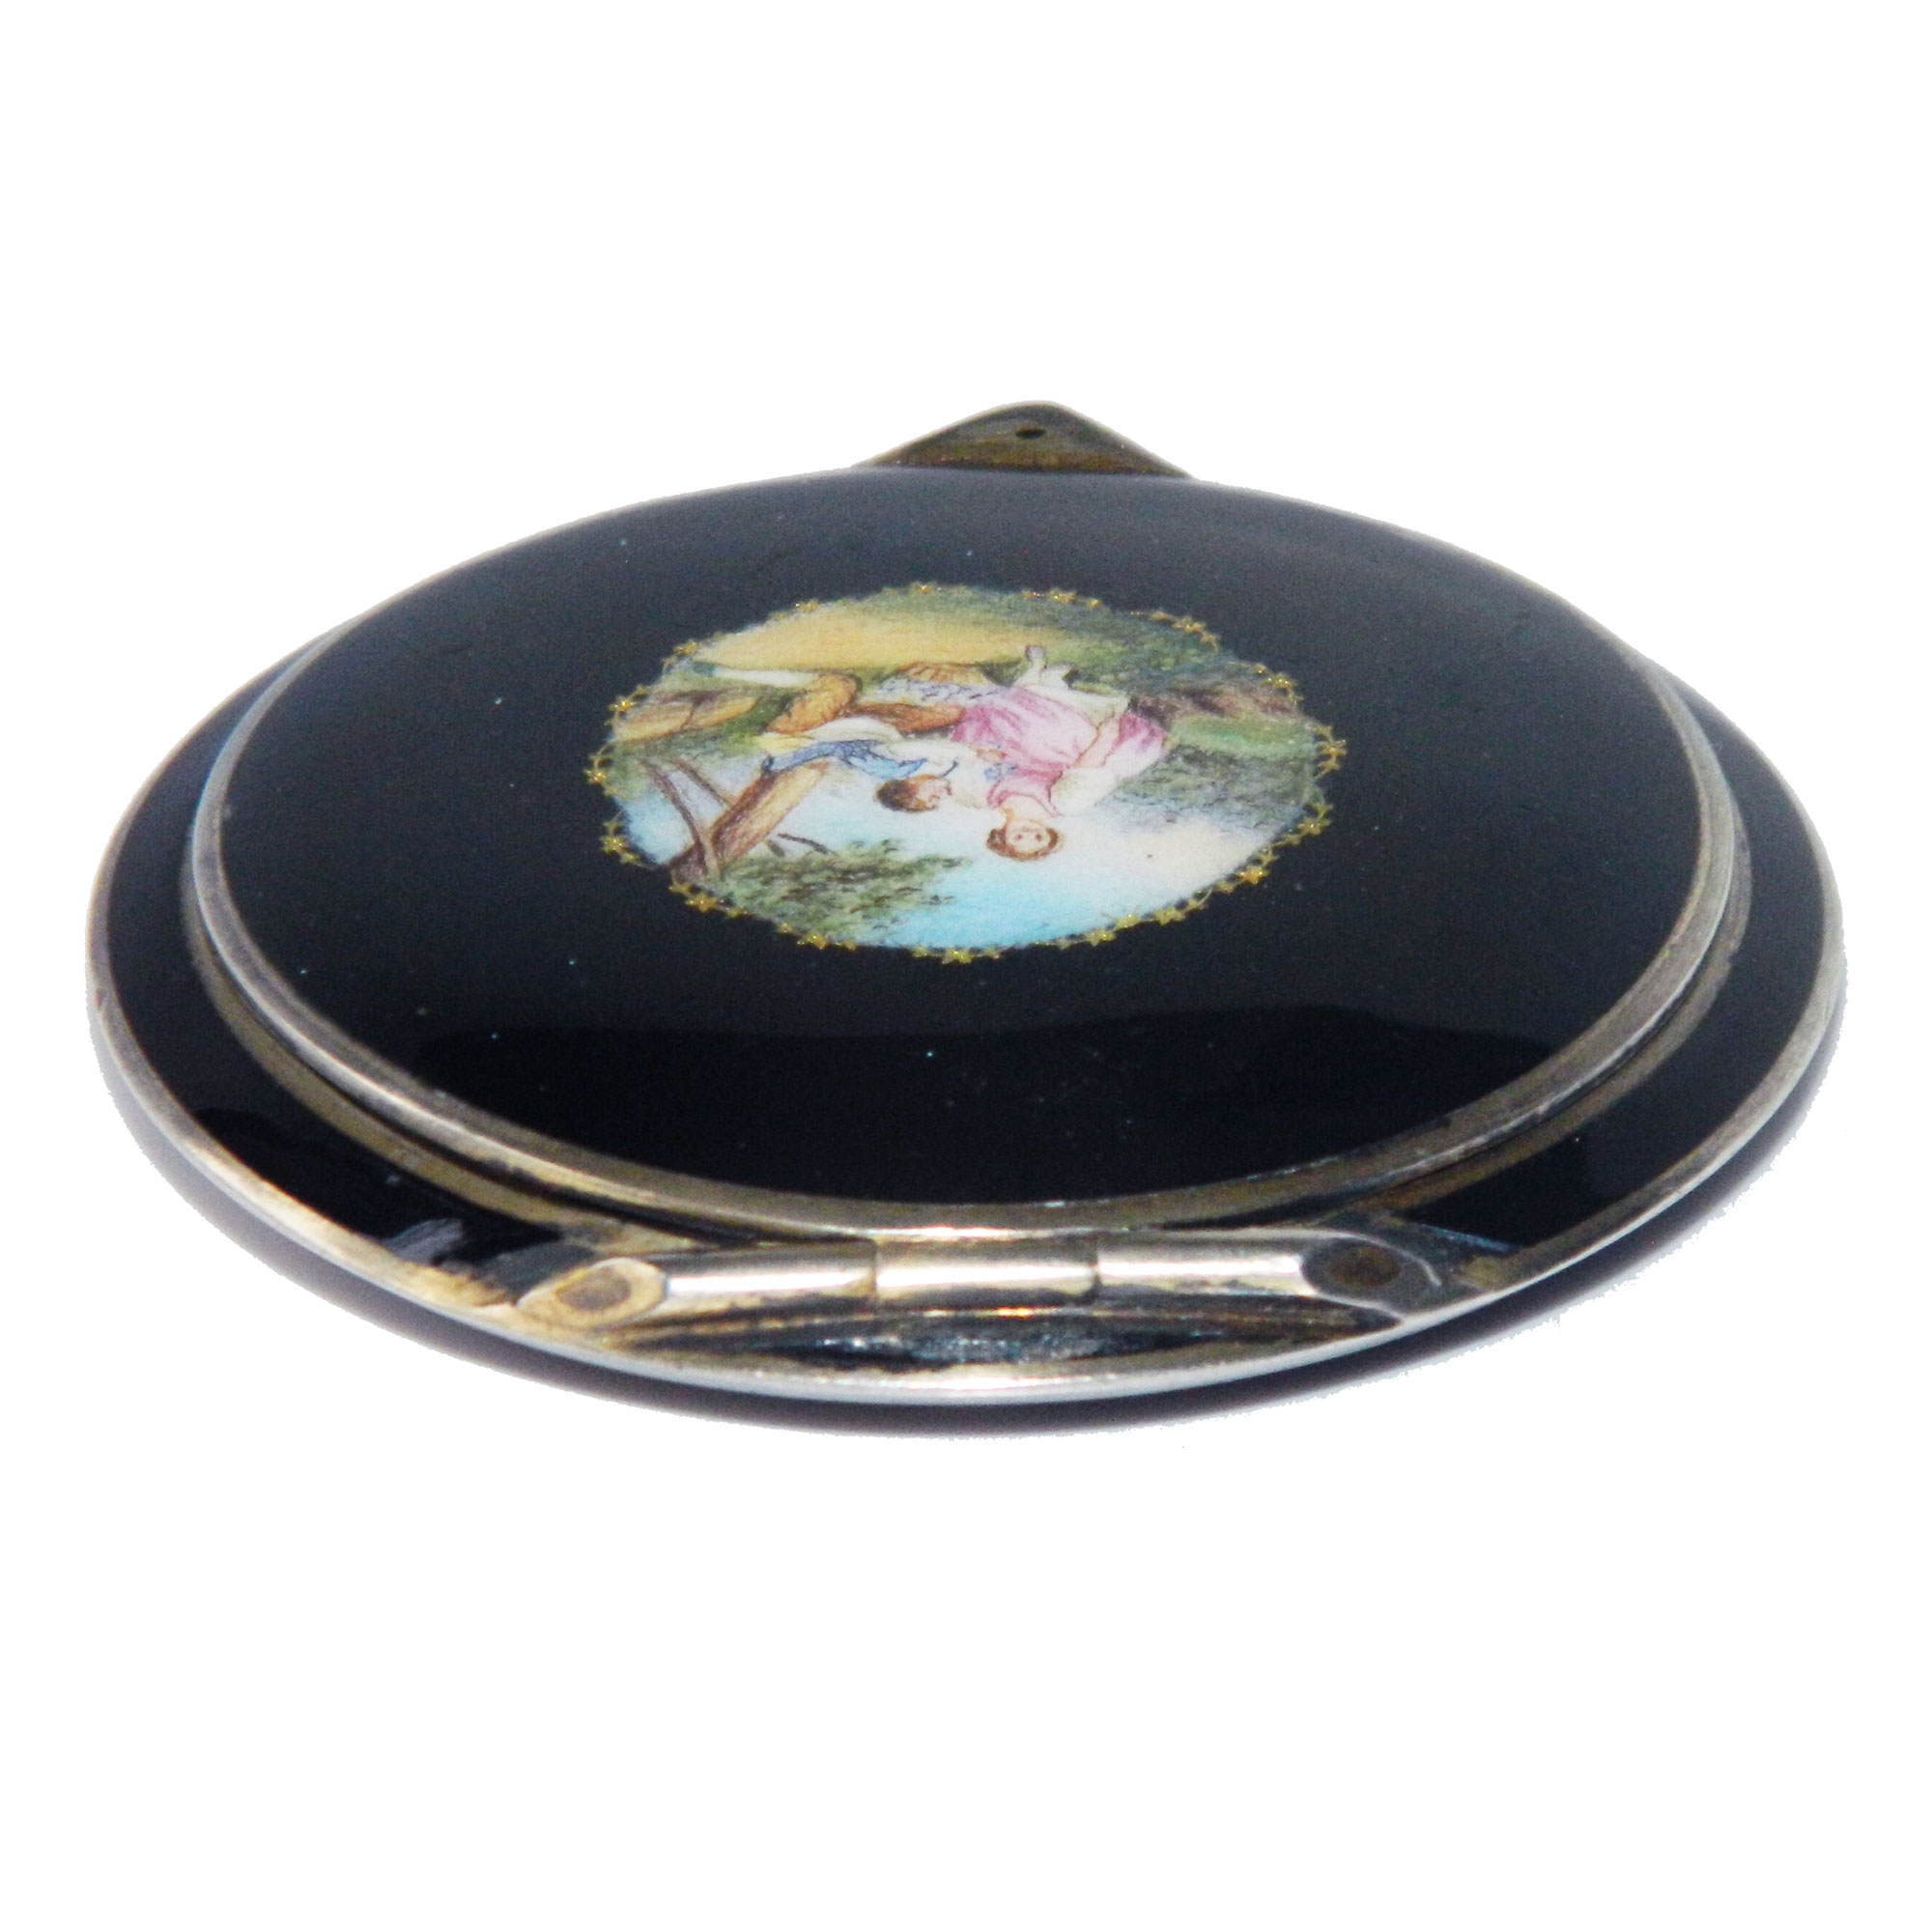 1920s enameled compact